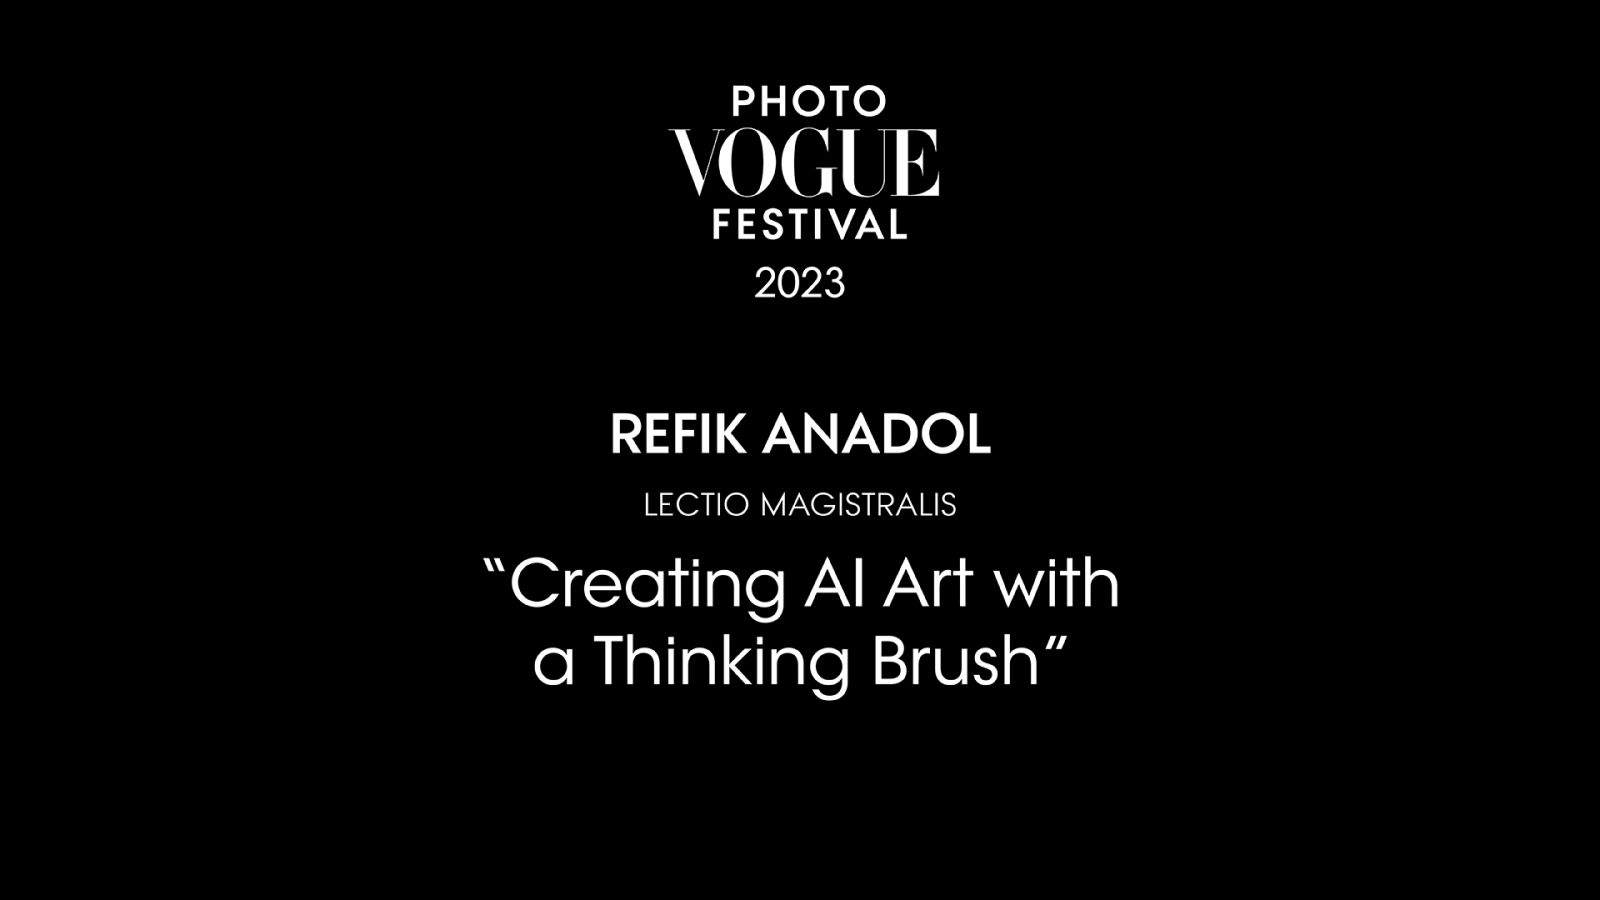 Refik Anadol “Creating A.I. Art with a Thinking Brush” | PhotoVogue Festival 2023: What Makes us Human? Image in the Age of A.I.